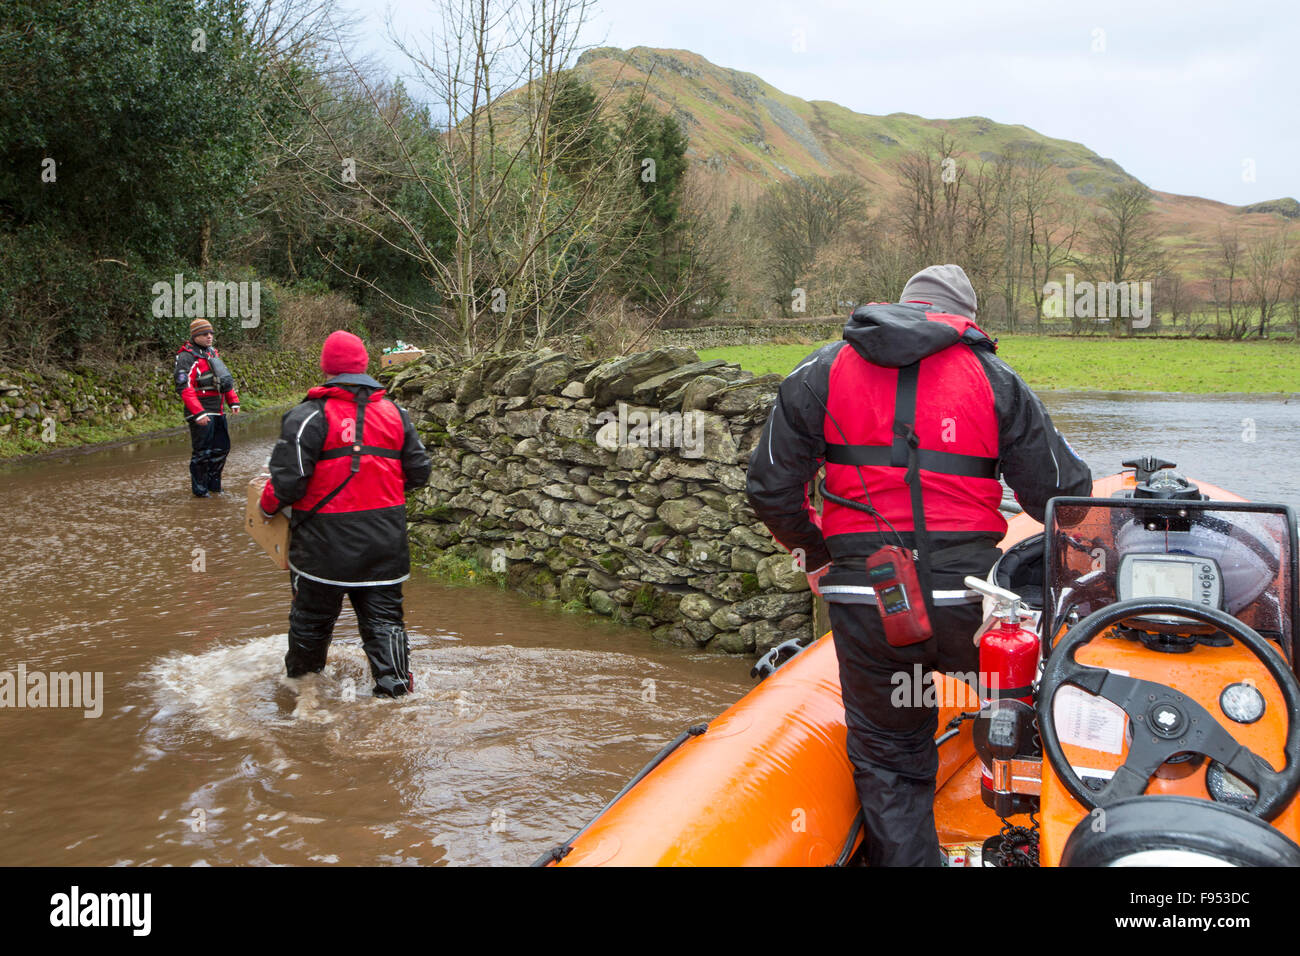 On Saturday 5th December 2015, Storm desmond crashed into the UK, producing the UK's highest ever 24 hour rainfall total at 341.4mm. It flooded the Lakeland village Glenridding, which was just starting to repair when another period of heavy rain on Wednesday 9th December caused the Glenridding Beck to burst its banks, causing yet further destruction. This photo taken the next morning on Friday 11th December shows Patterdale Mountain Rescue Team in their rescue boat, taking food supplies to Howtown on the other side of the Lake that has been cut off for five days by the floods. Stock Photo